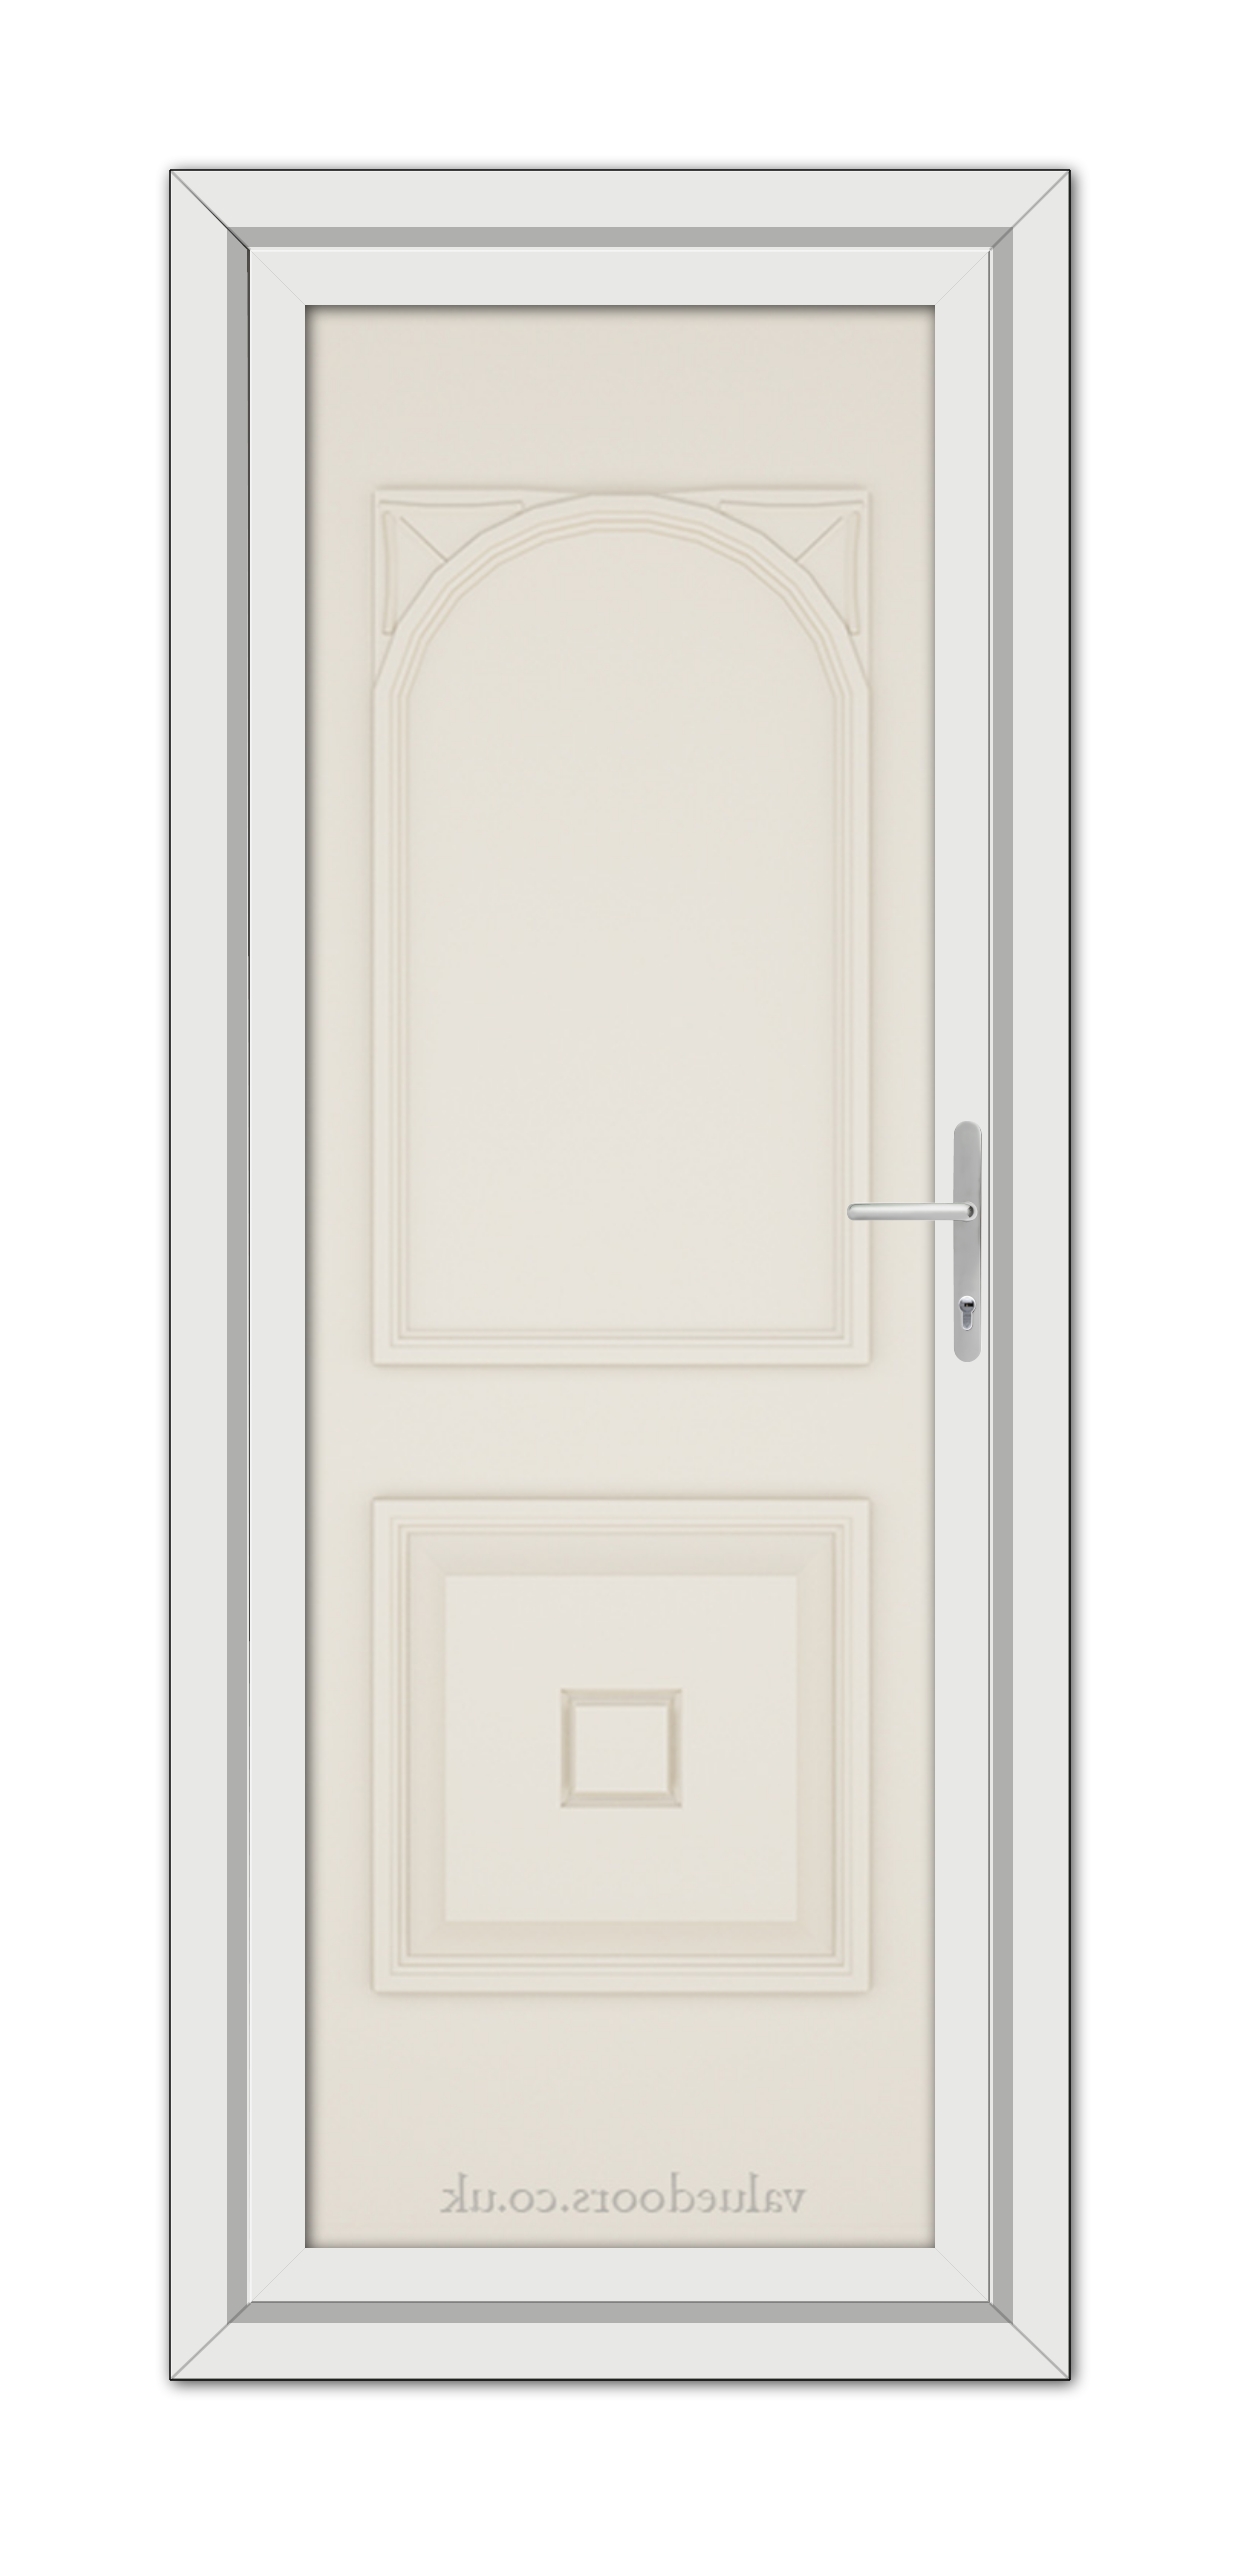 A vertical image of a closed, Cream Reims Solid uPVC Door with an arched top panel and a rectangular bottom panel, fitted with a modern handle, set within a white frame.